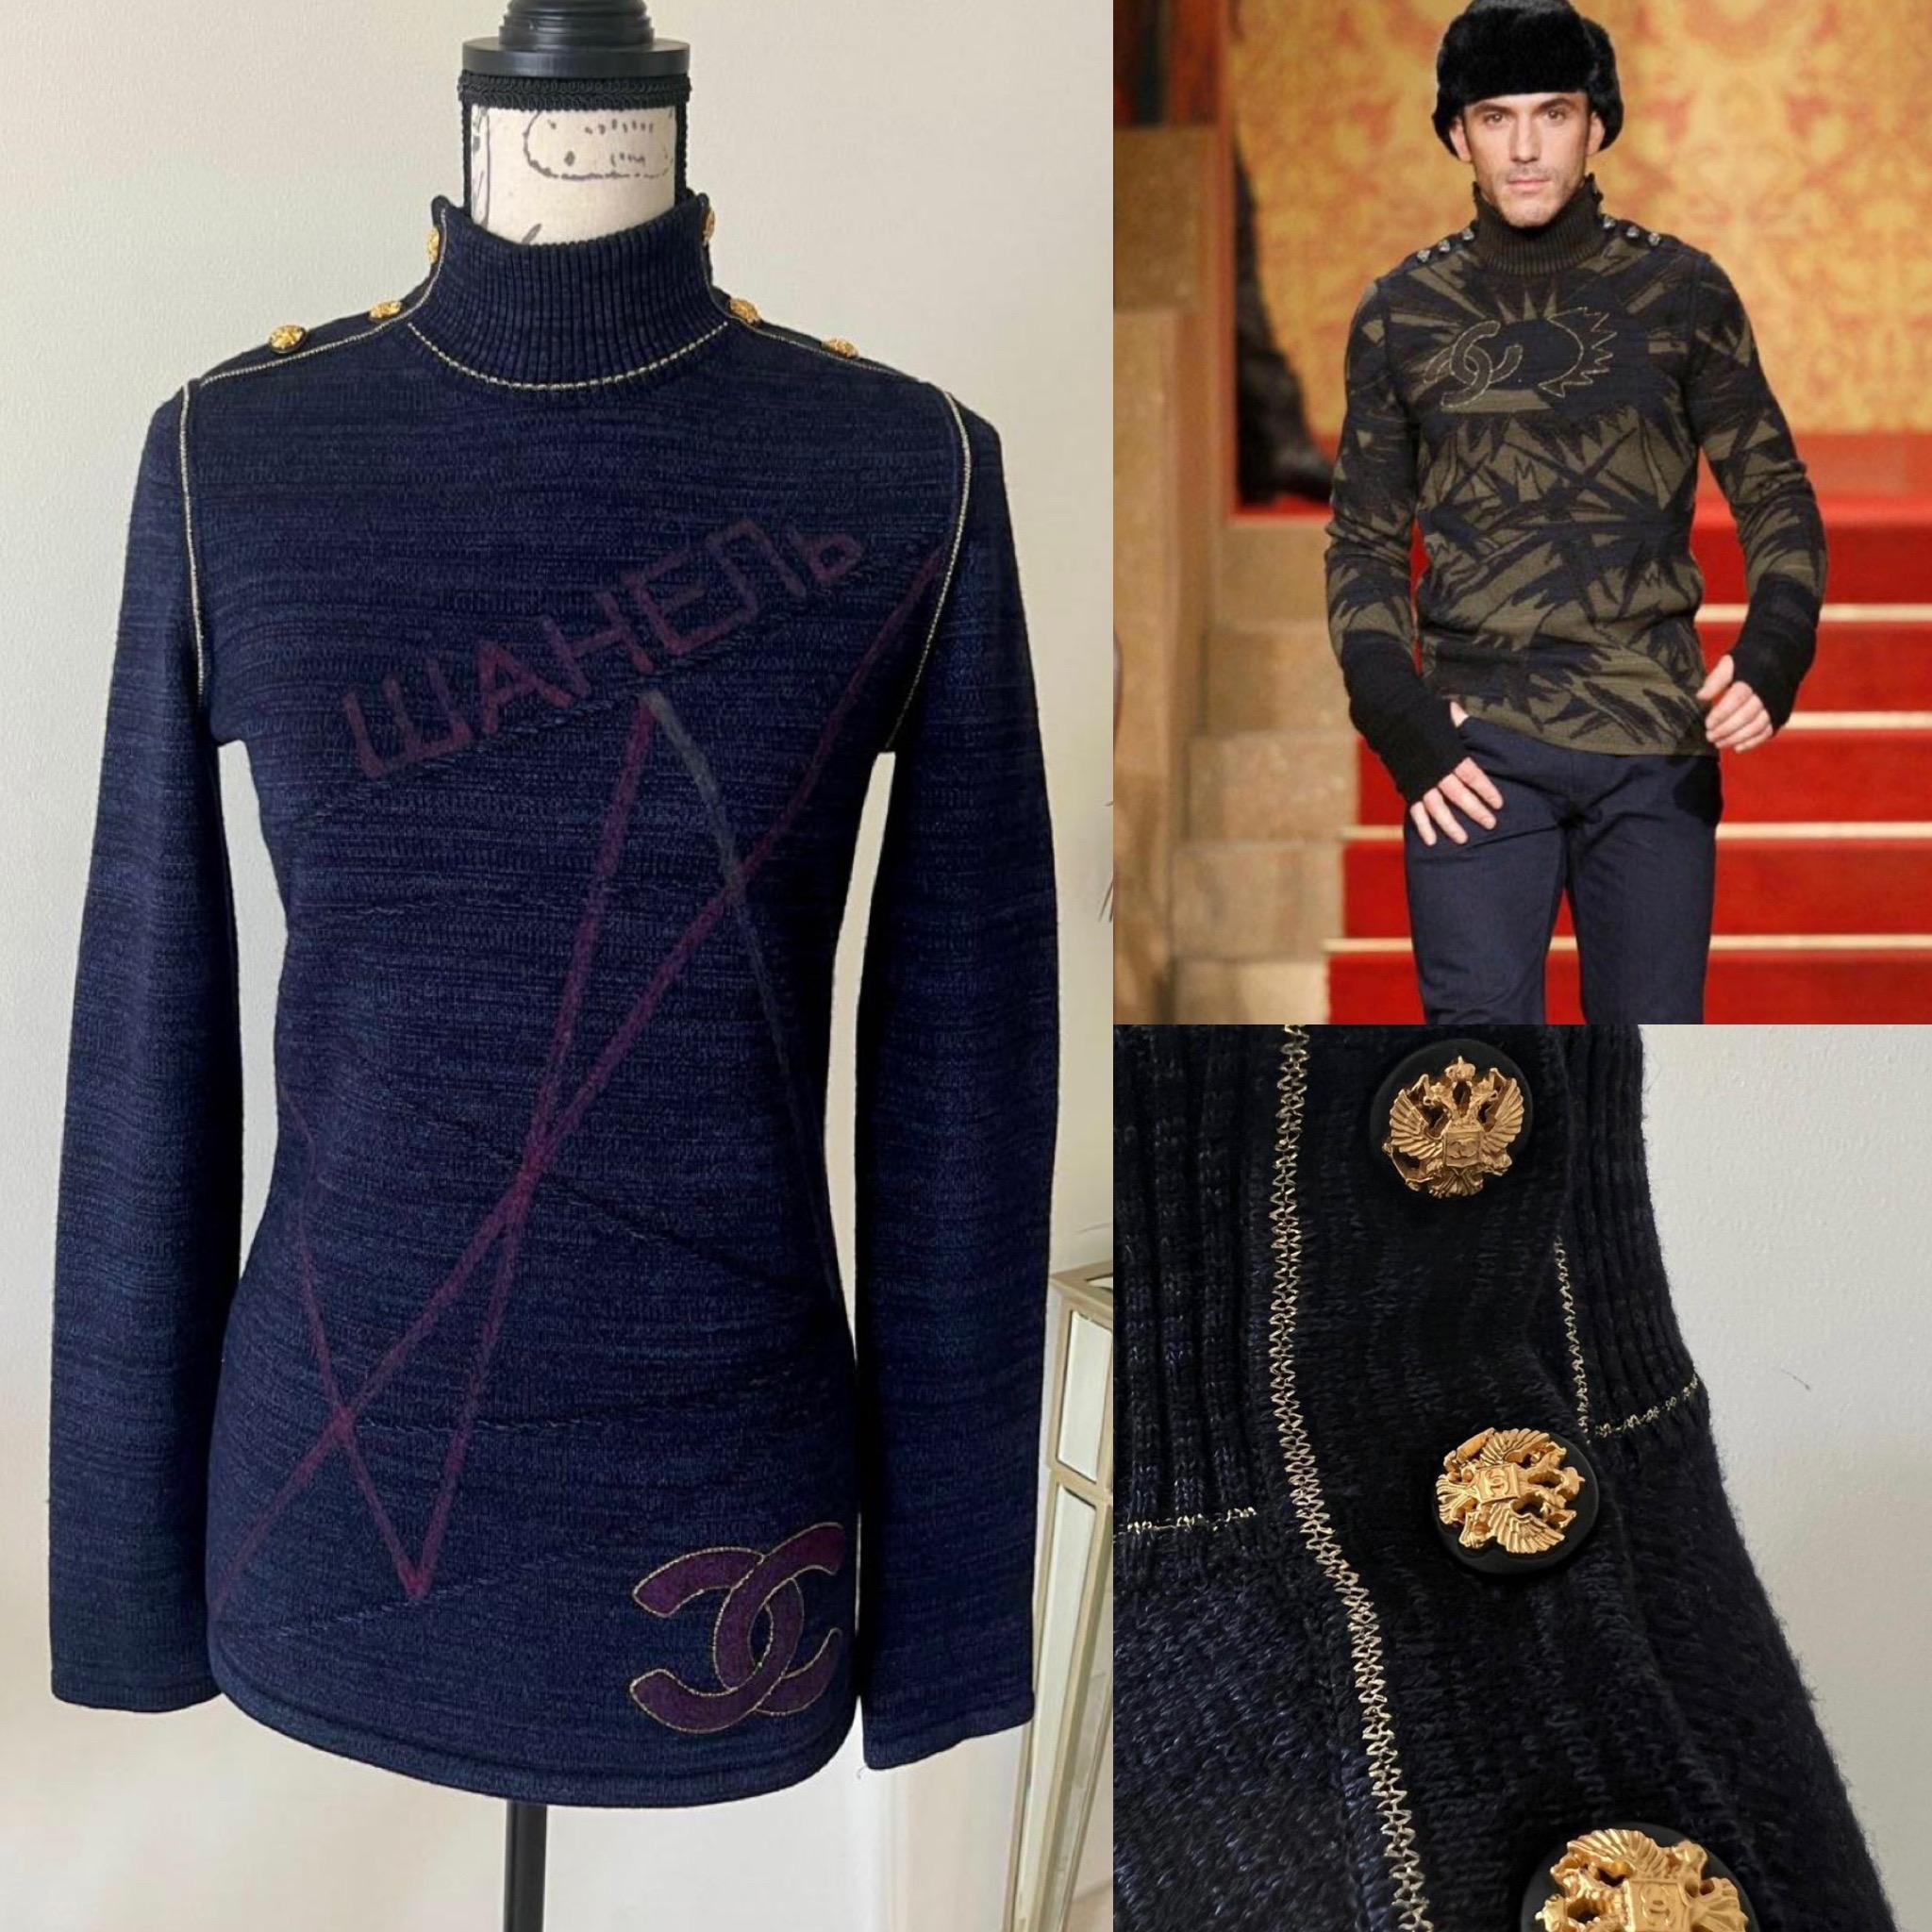 Stunning and rare Chanel jumper with CC logo from 2009 Pre-Fall Metiers d'Art Collection, 09a
- made of softest wool, silk and cashmere blend
- CC logo buttons with eagles at each shoulder
Size mark 36 fr. New, never worn.